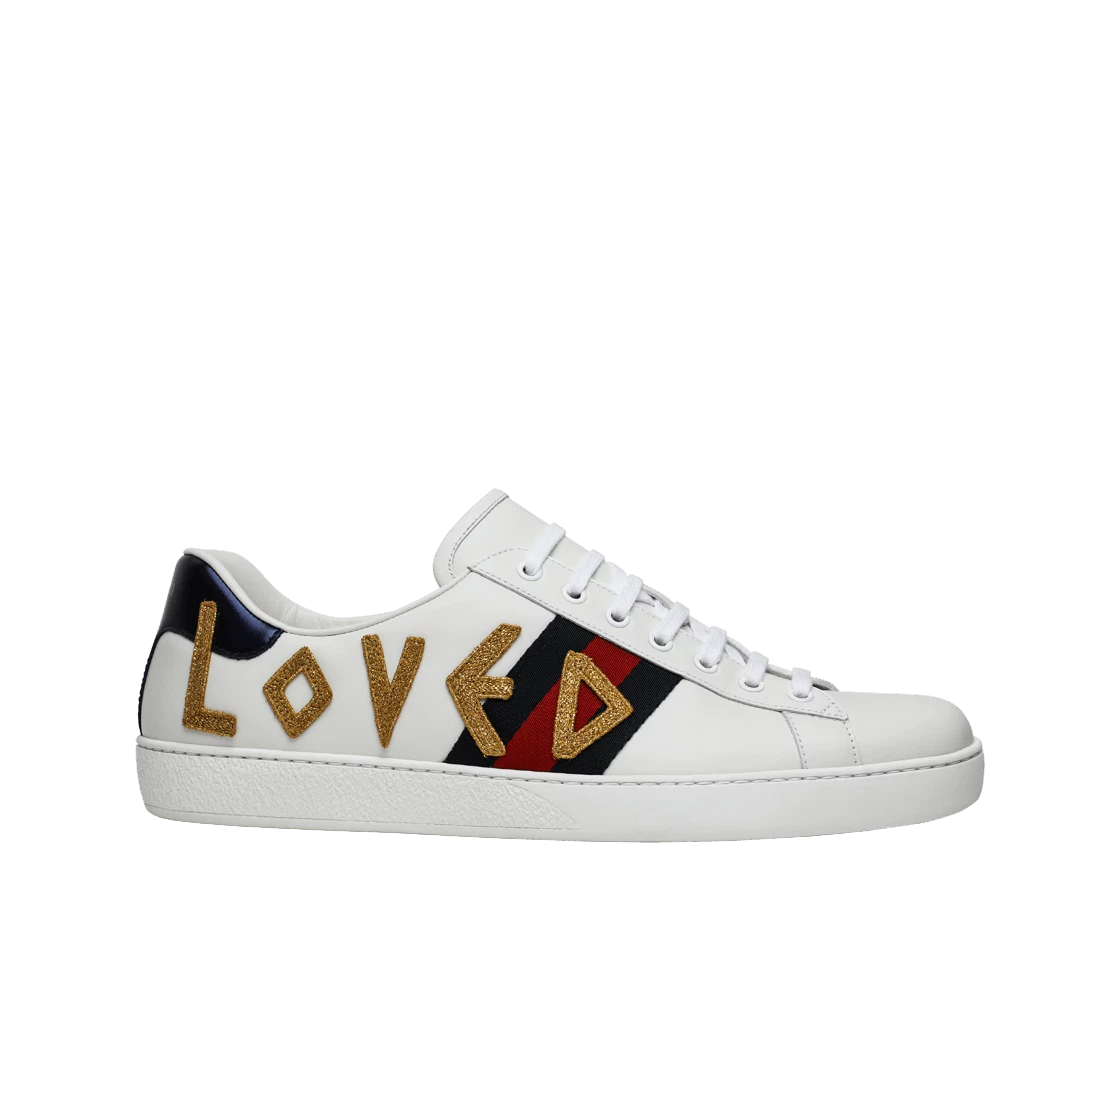 https://d2cva83hdk3bwc.cloudfront.net/gucci-ace-loved-embroidered-sneakers-2.jpg